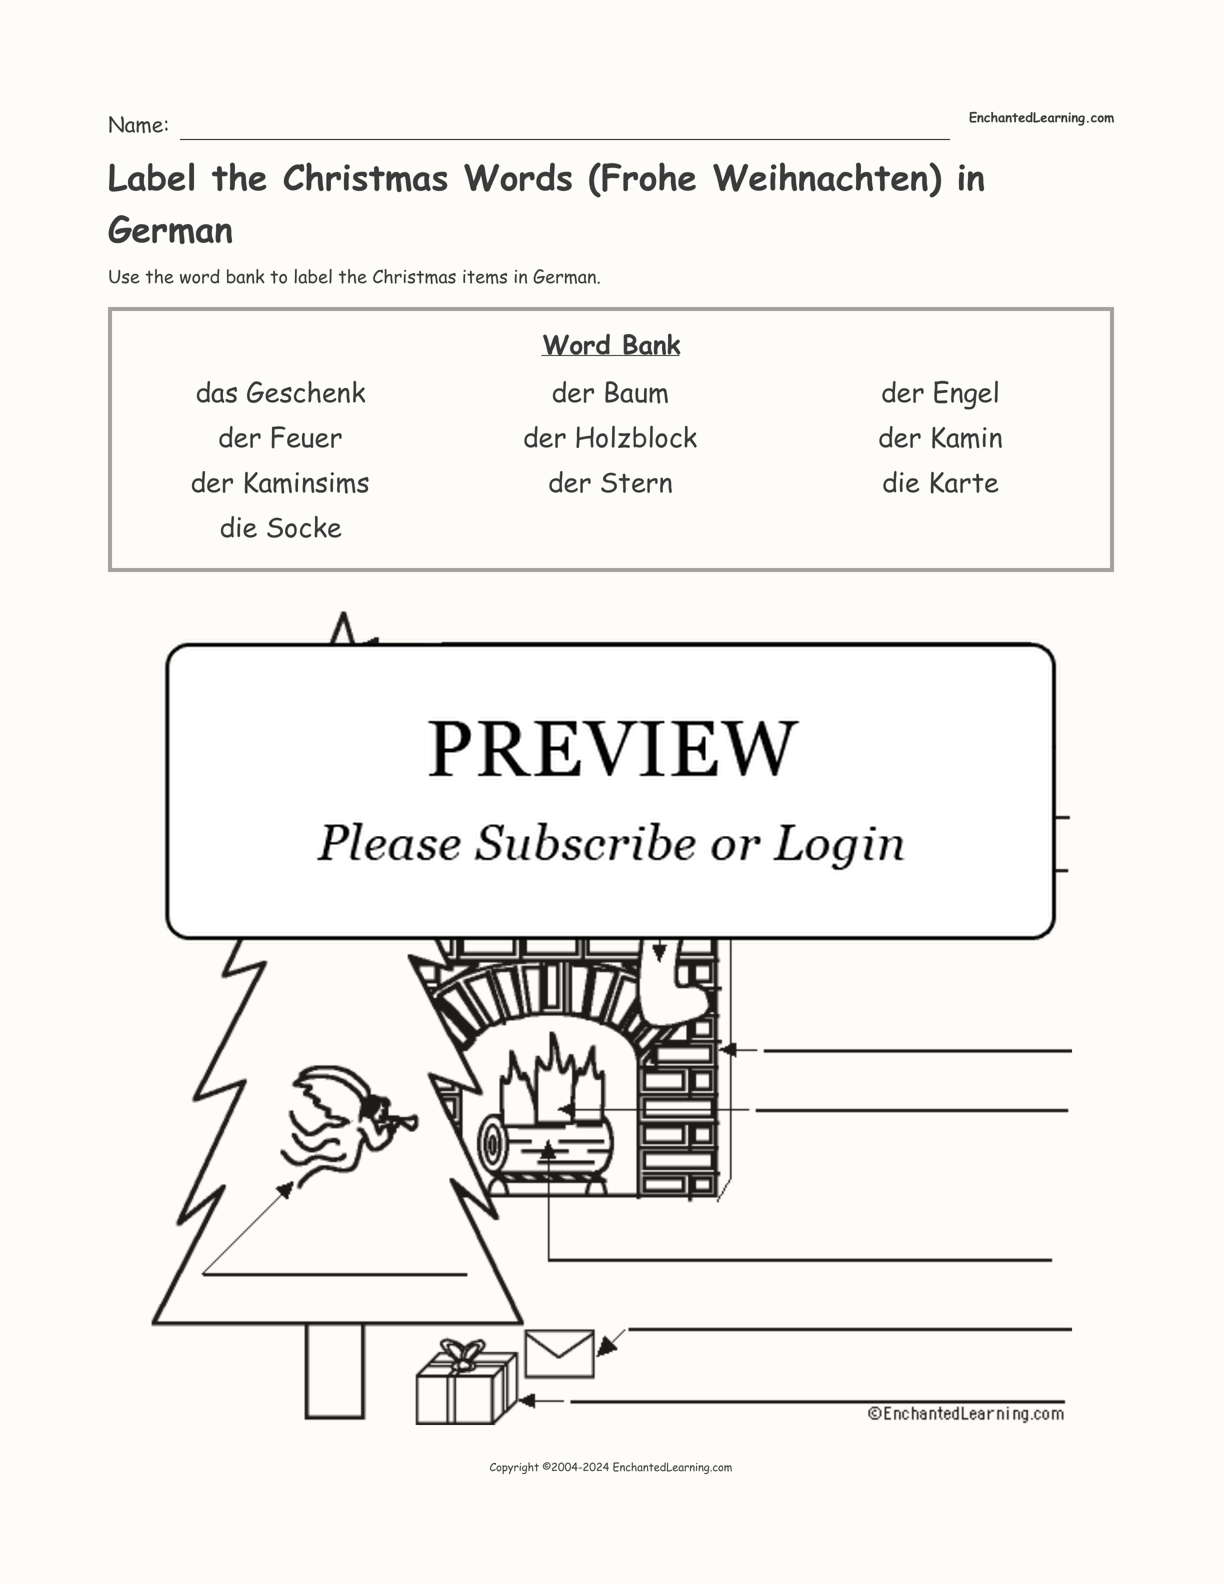 Label the Christmas Words (Frohe Weihnachten) in German interactive worksheet page 1